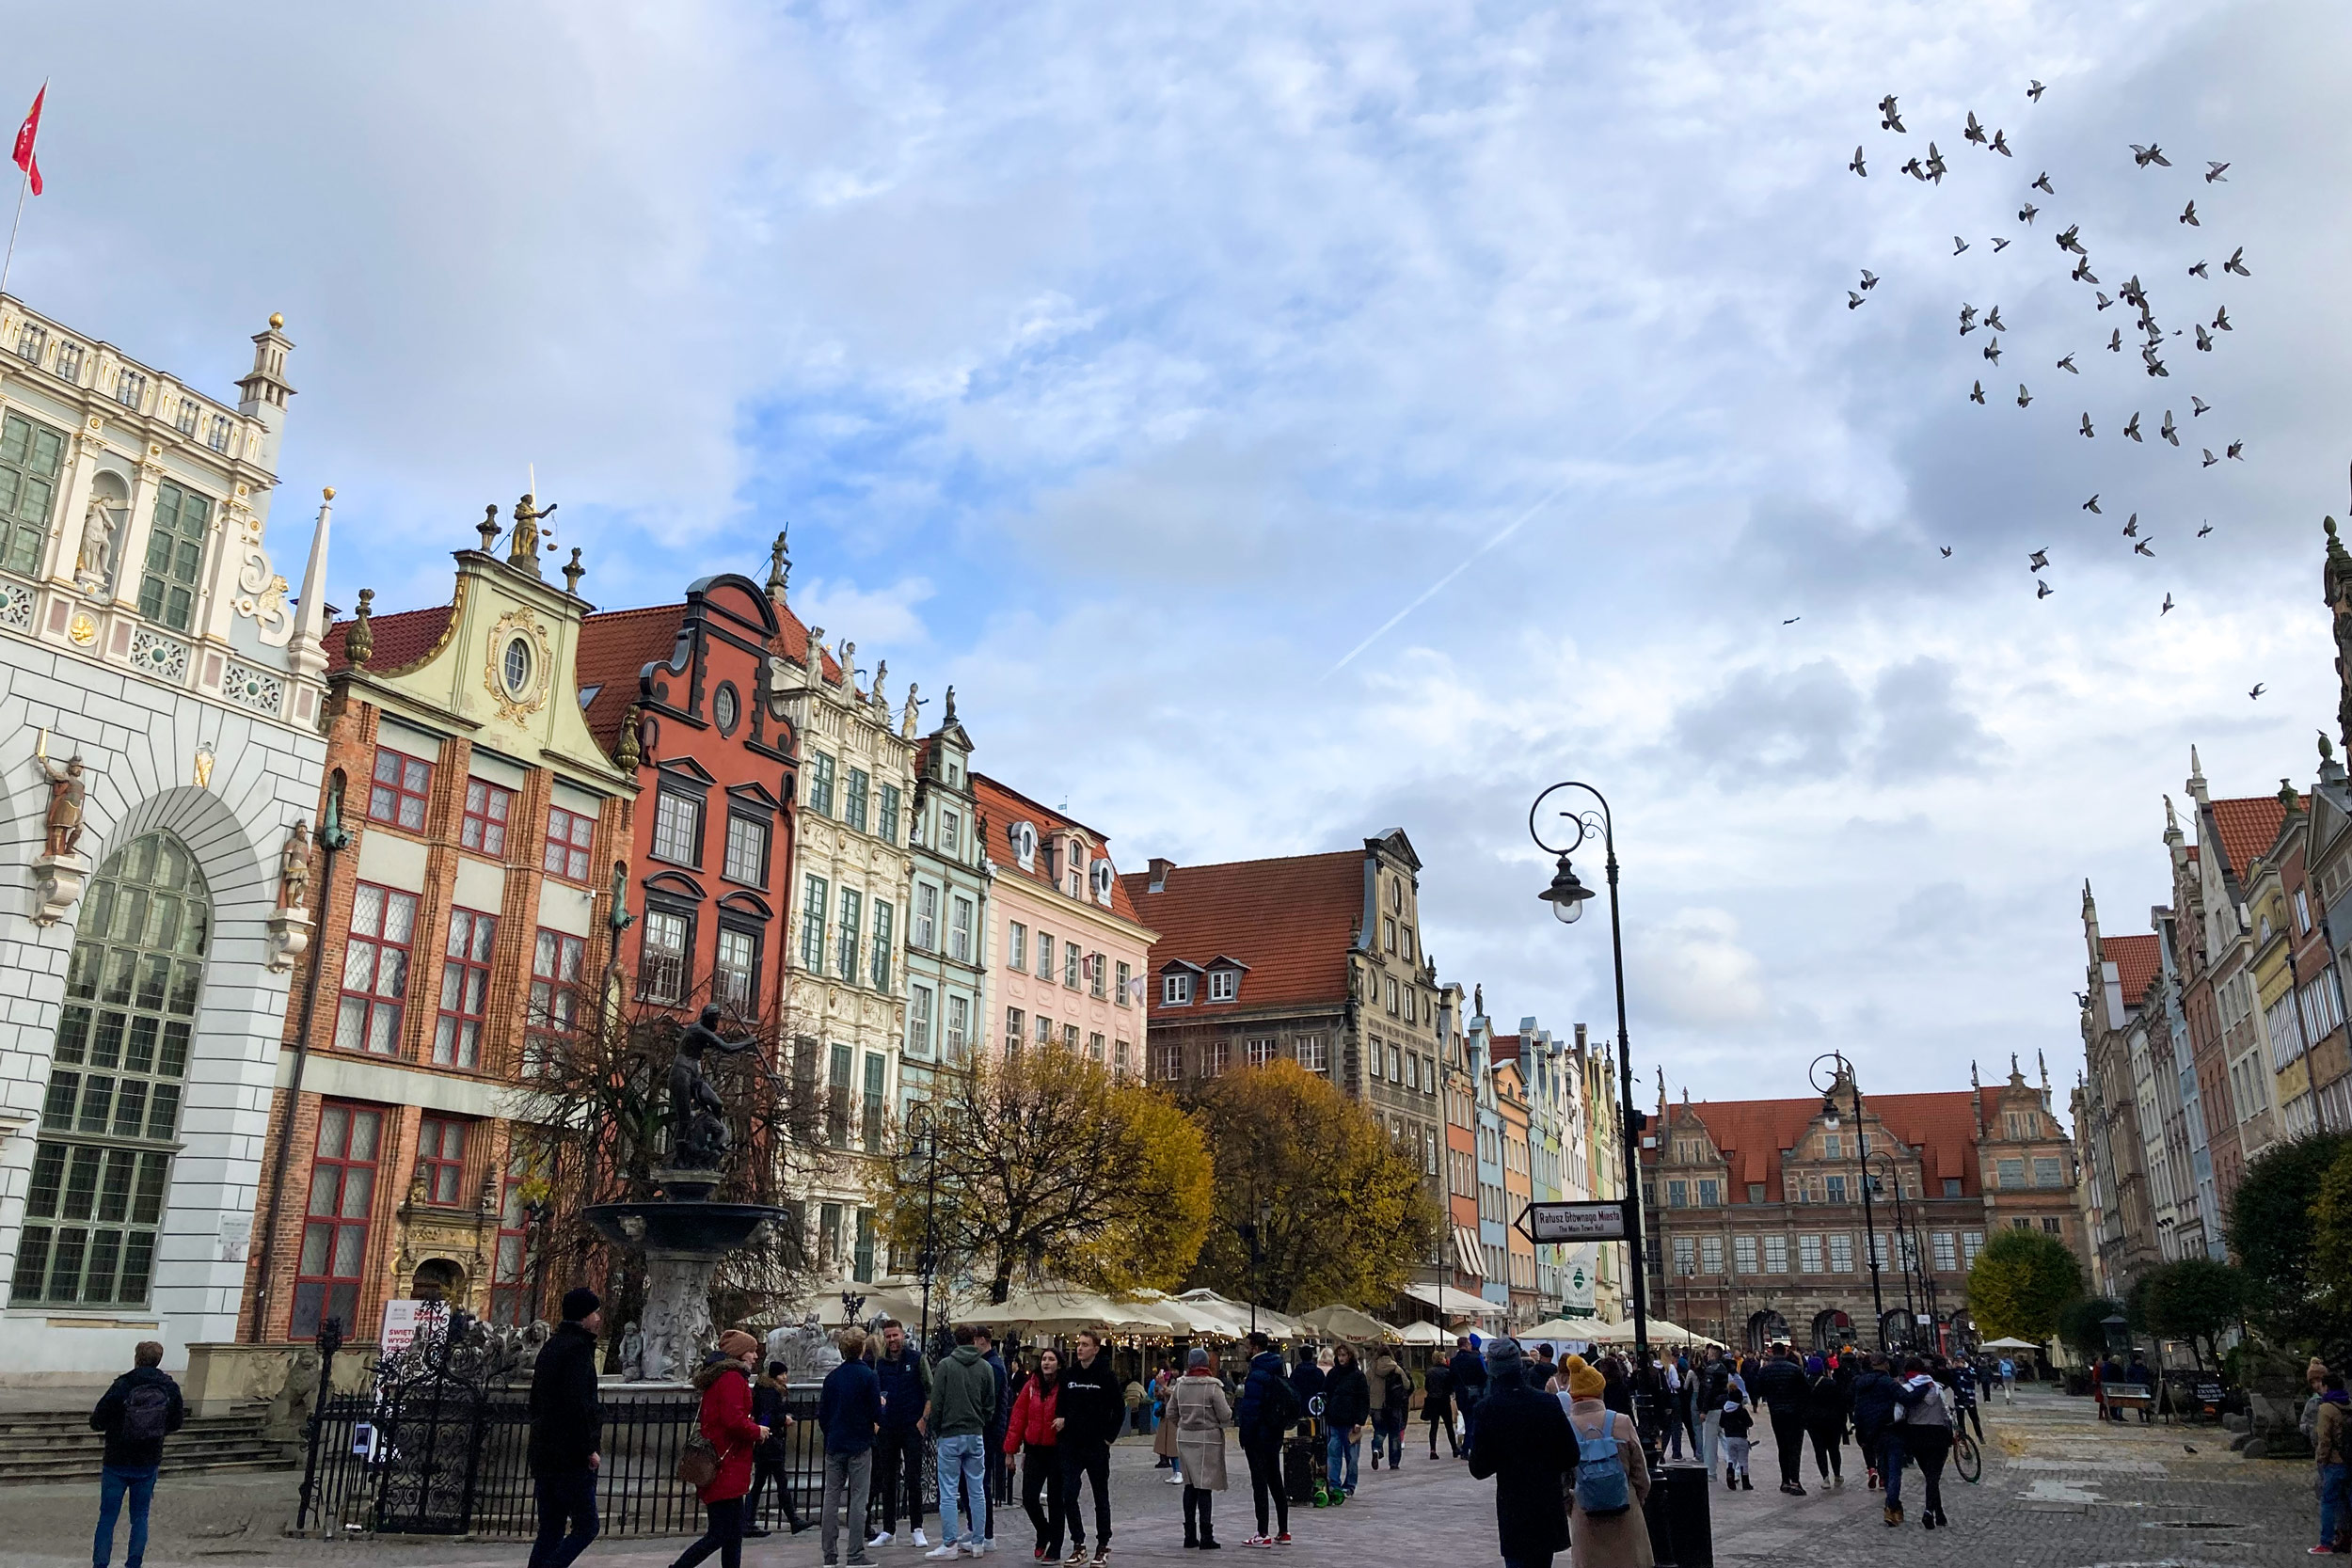 The Old Town in Gdansk